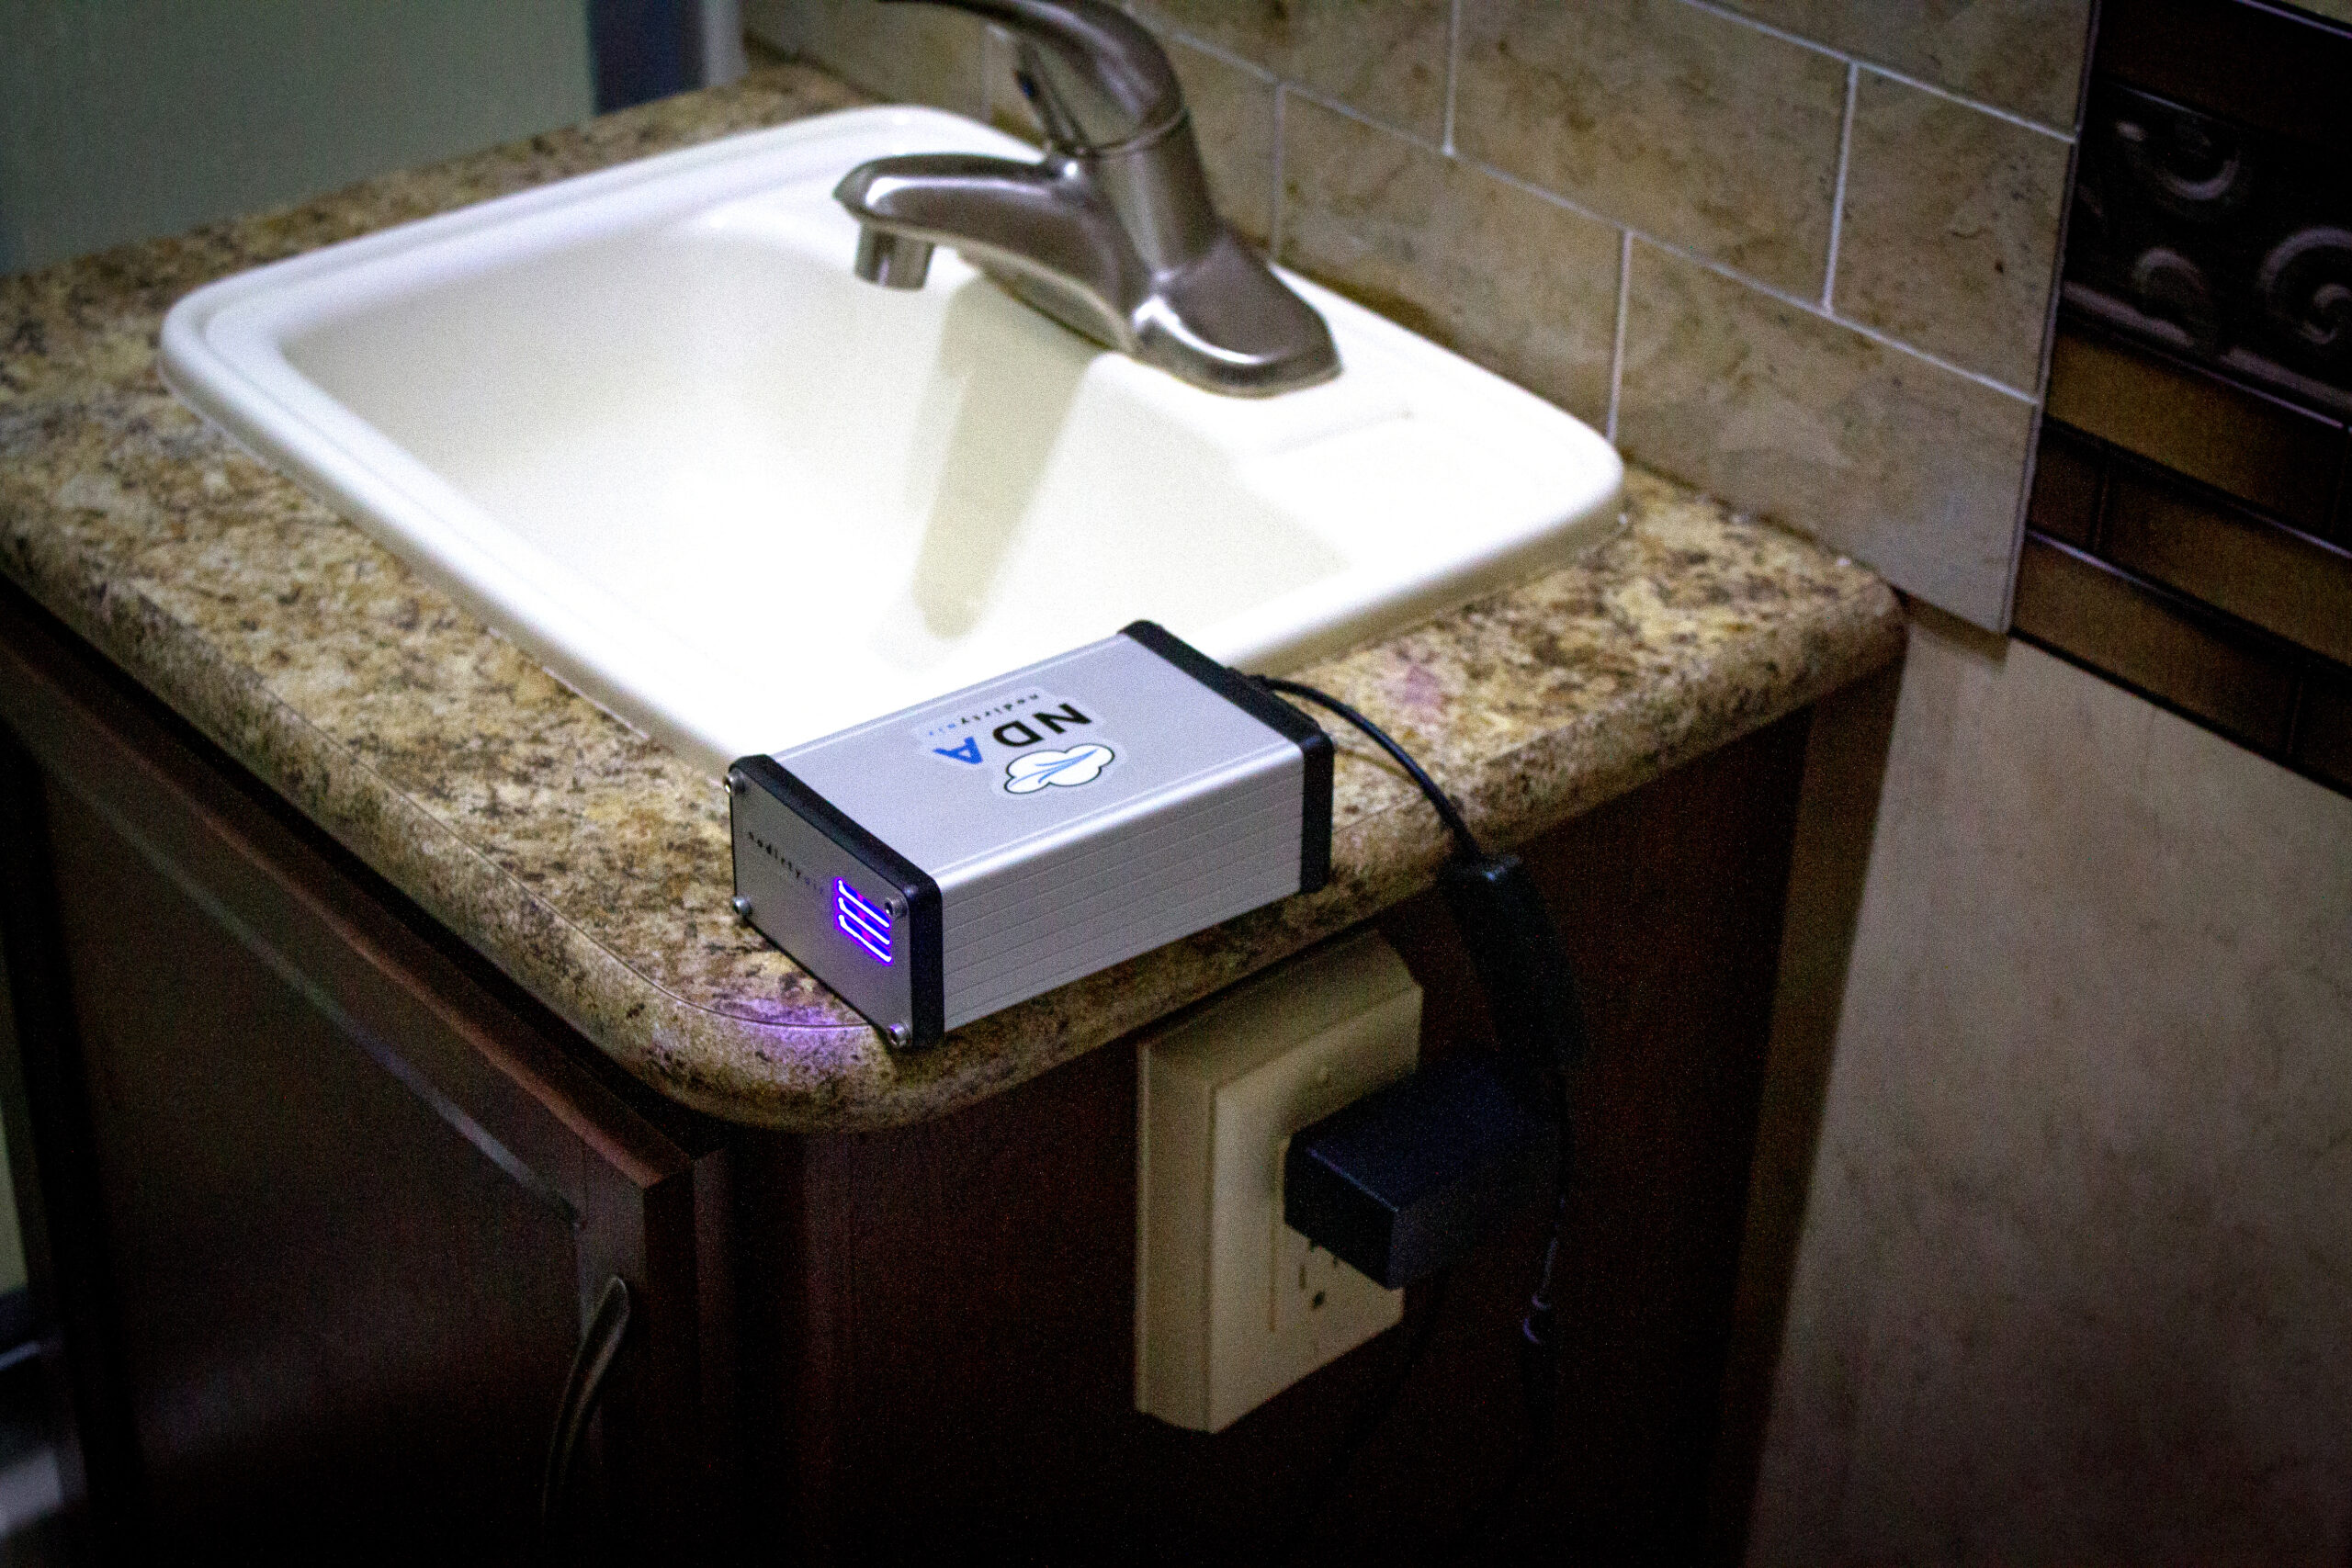 An NDA mobile is small enough to fit in your bathroom.